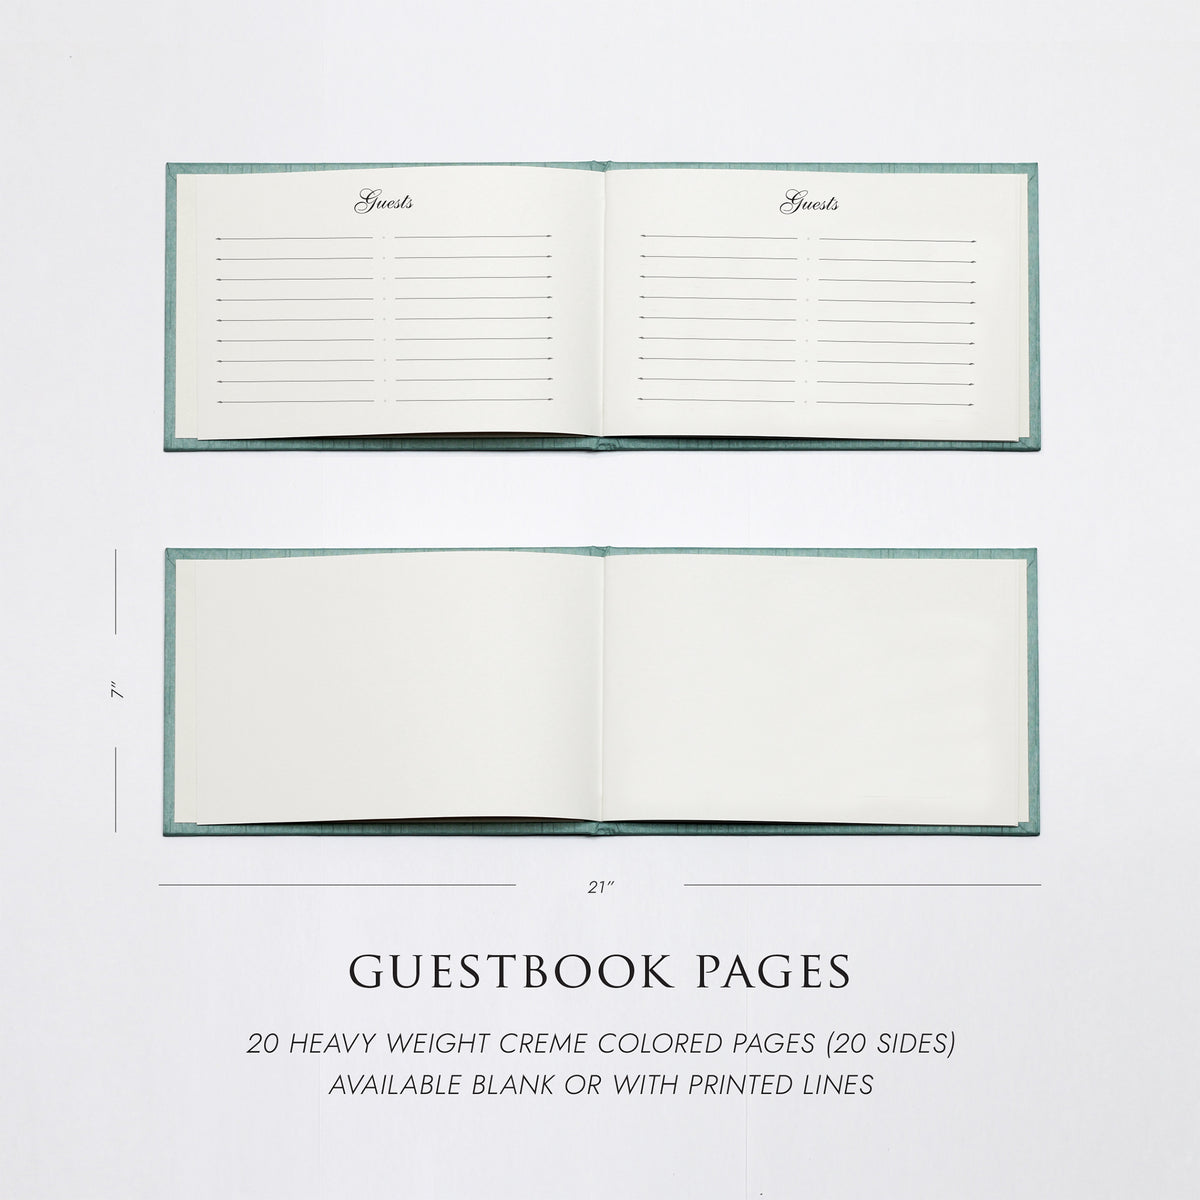 Guestbook Embossed with “Guests” with Emerald Silk Cover